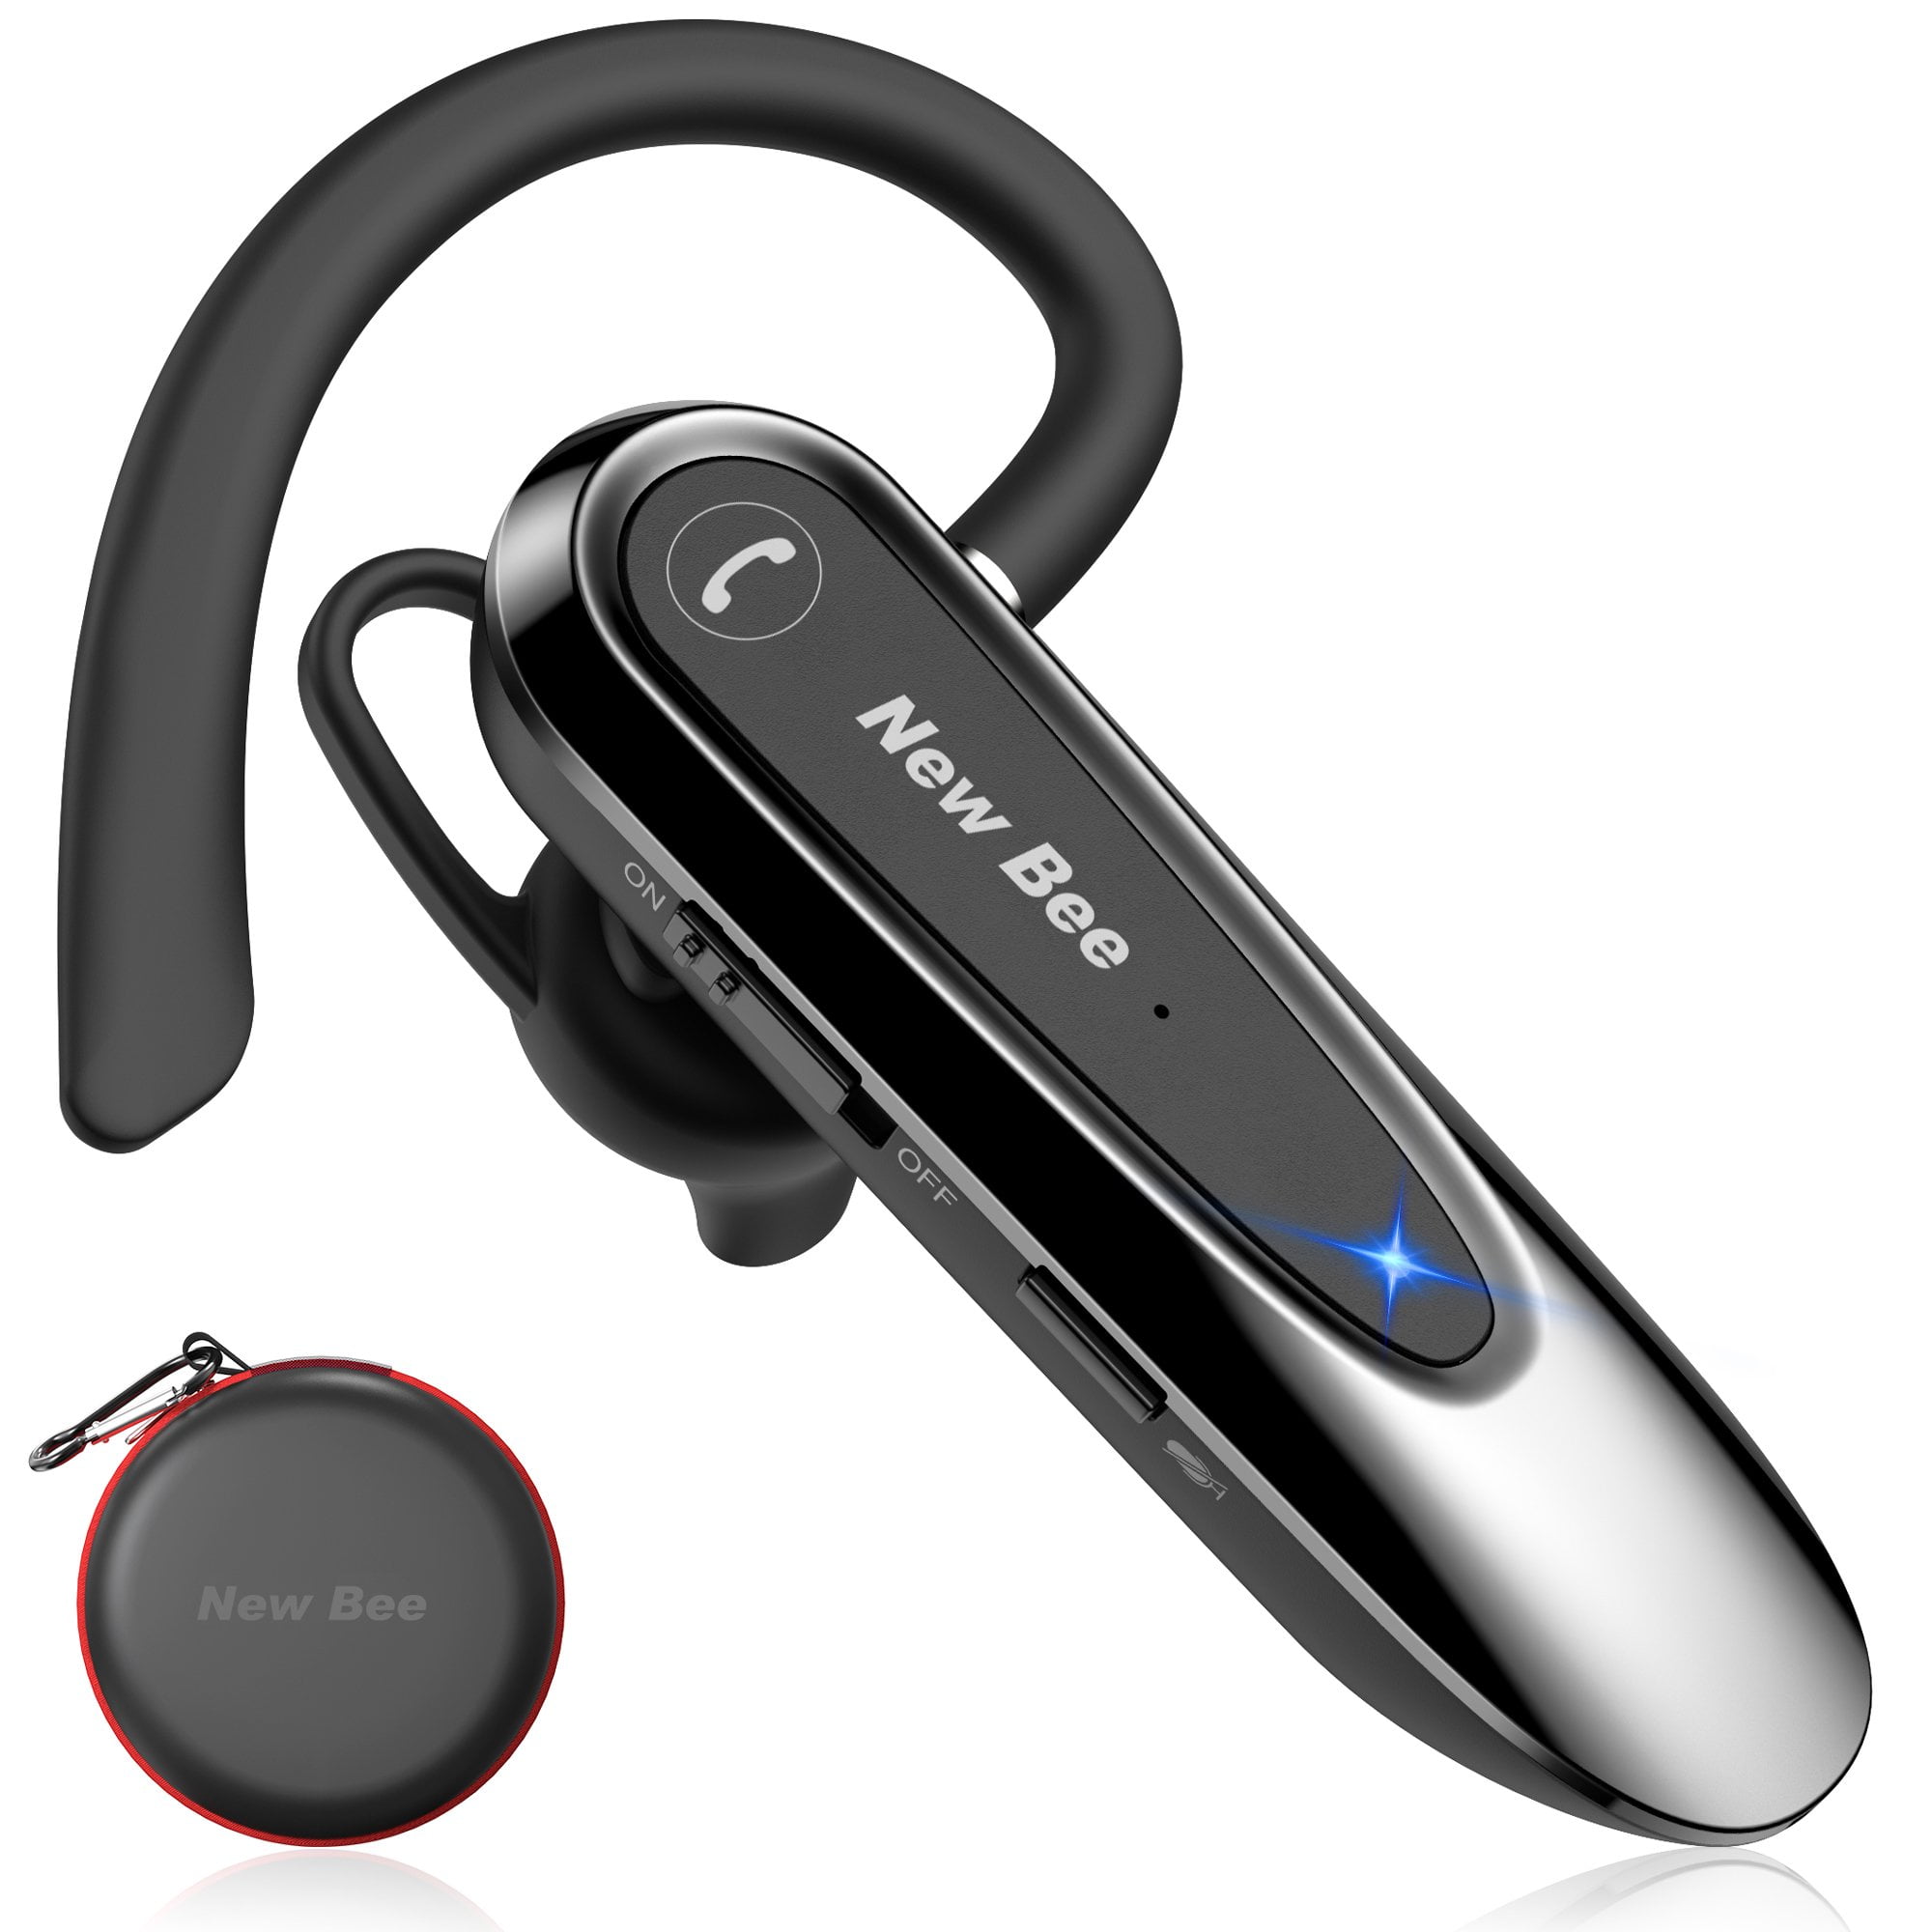 New Bee Enc Cancelling Headset Wireless Earpiece for Drivring/Business/Office - Walmart.com